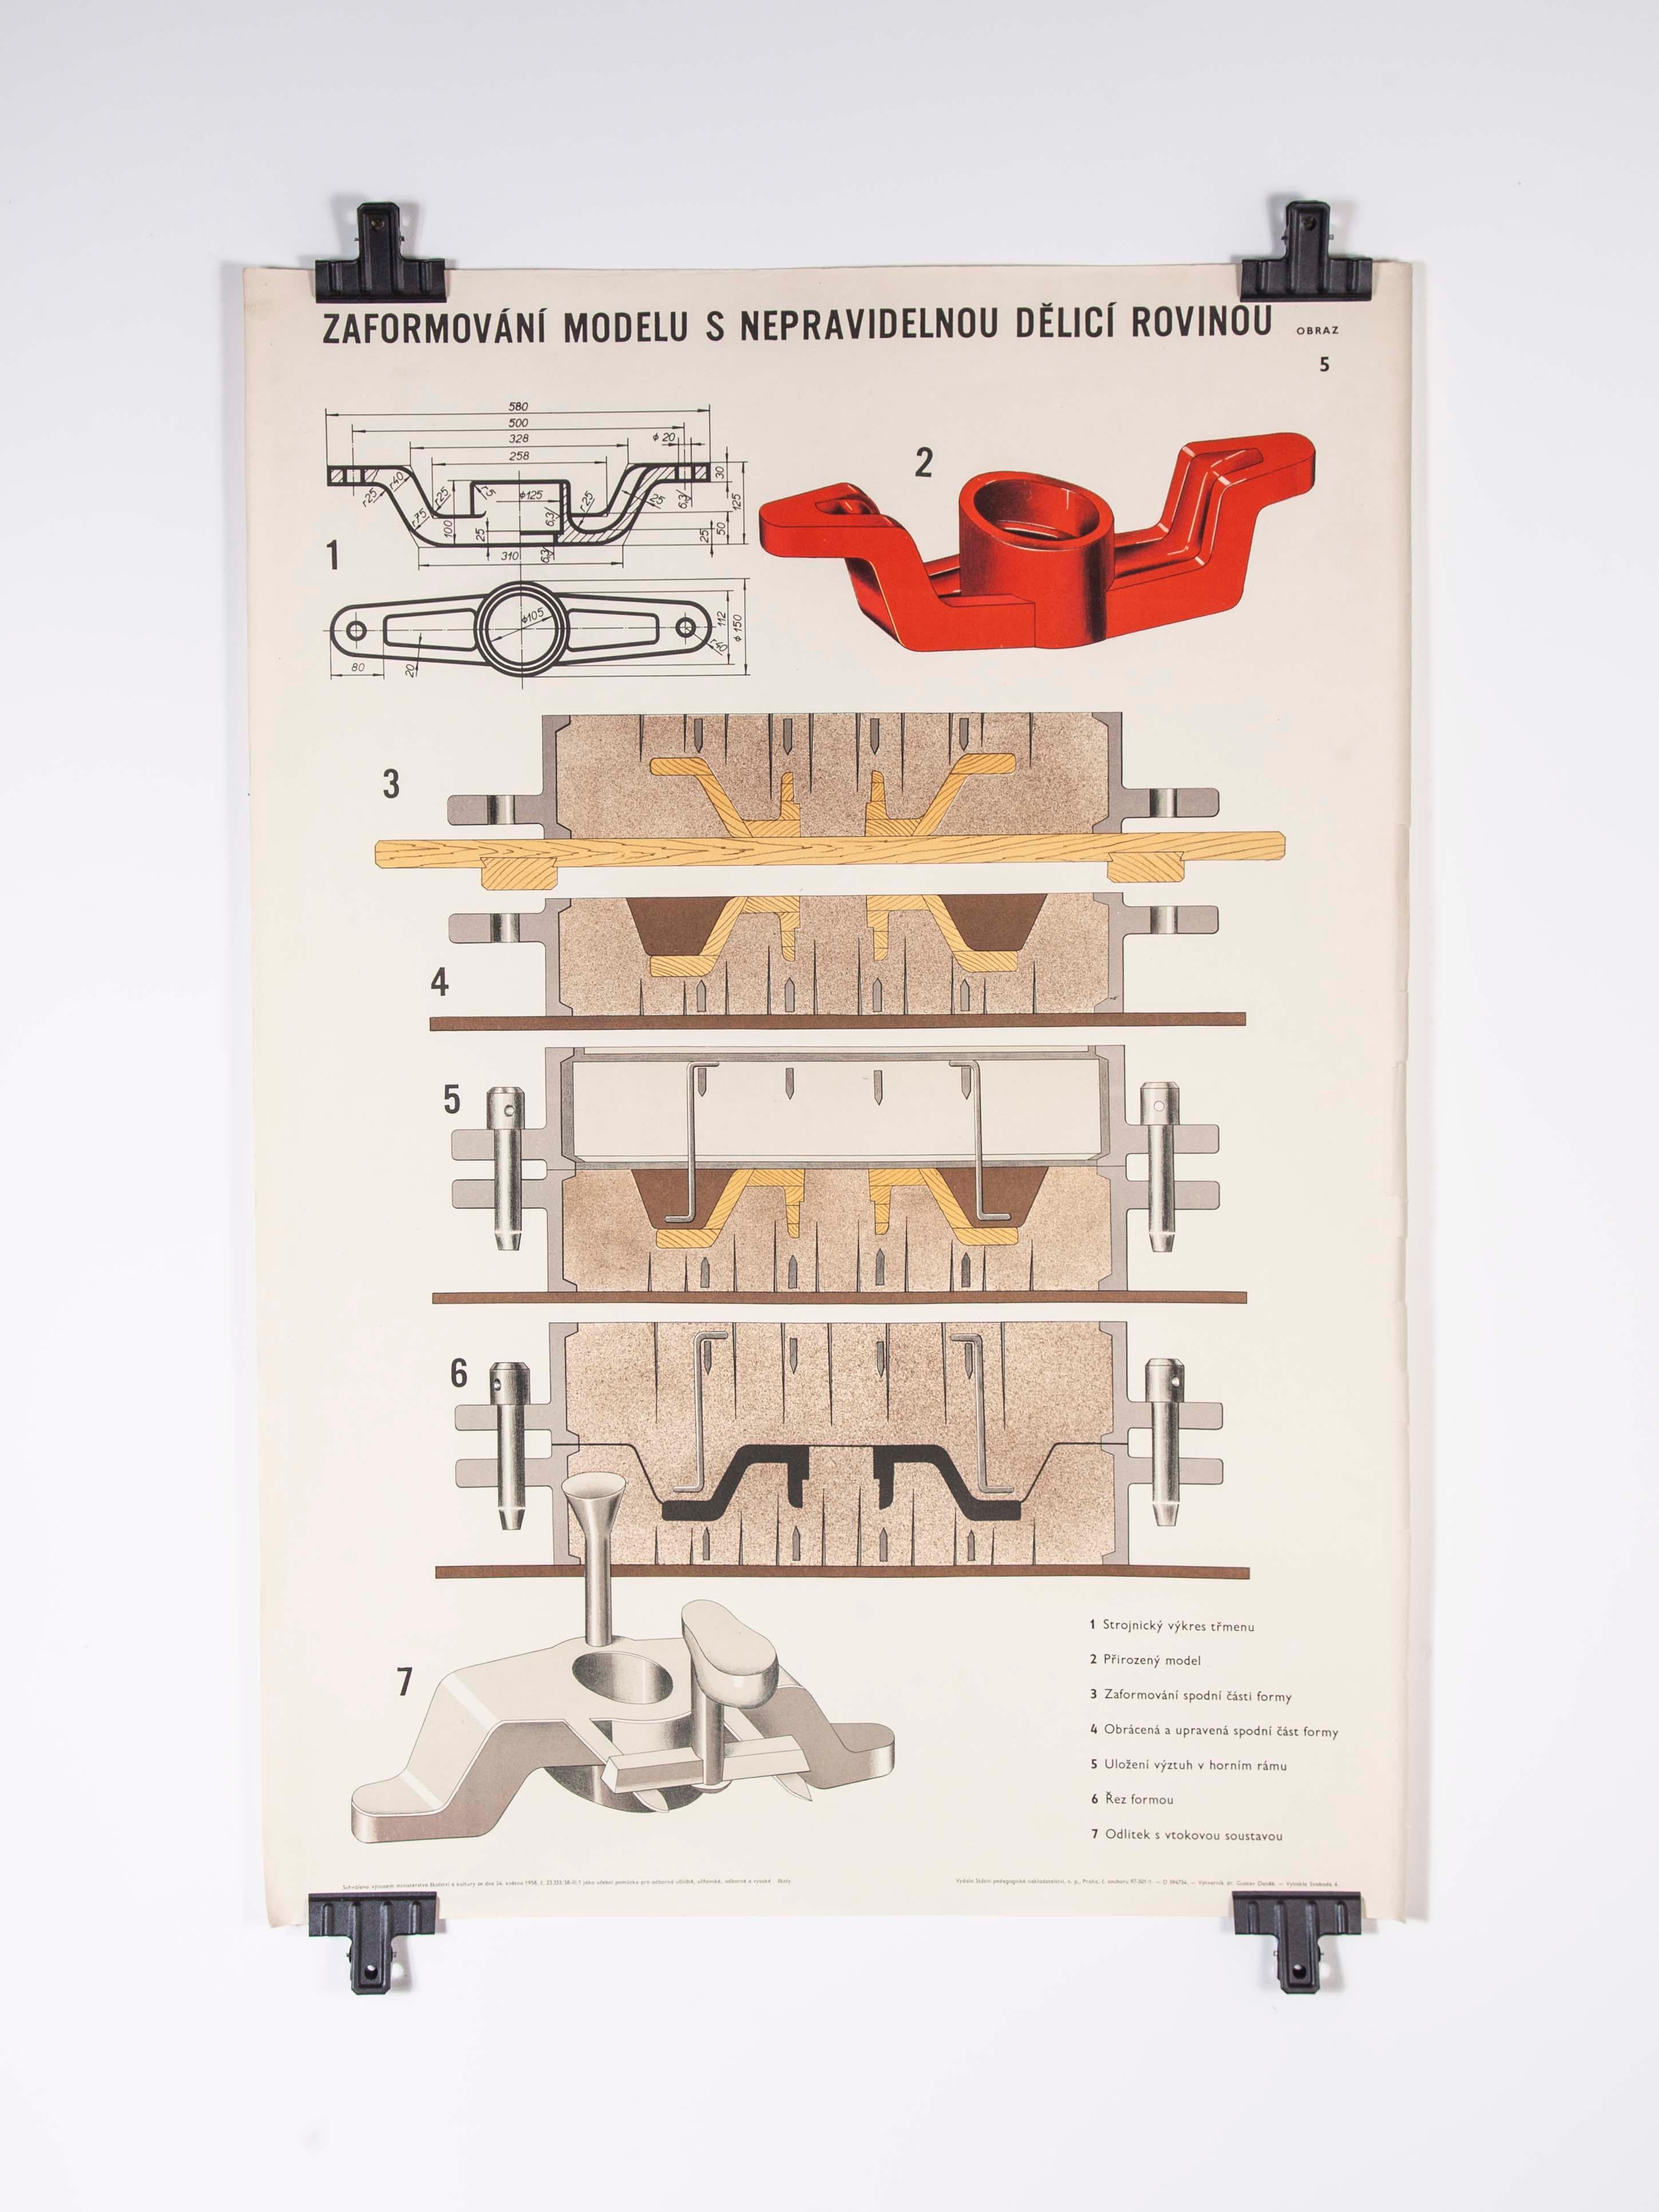 Czech technical industrial drawing, foundry mould engineering poster – 25

Sourced from an old engineering workshop in the Czech Republic, an amazing series of technical Industrial drawings explaining the process of sand casting and creating the